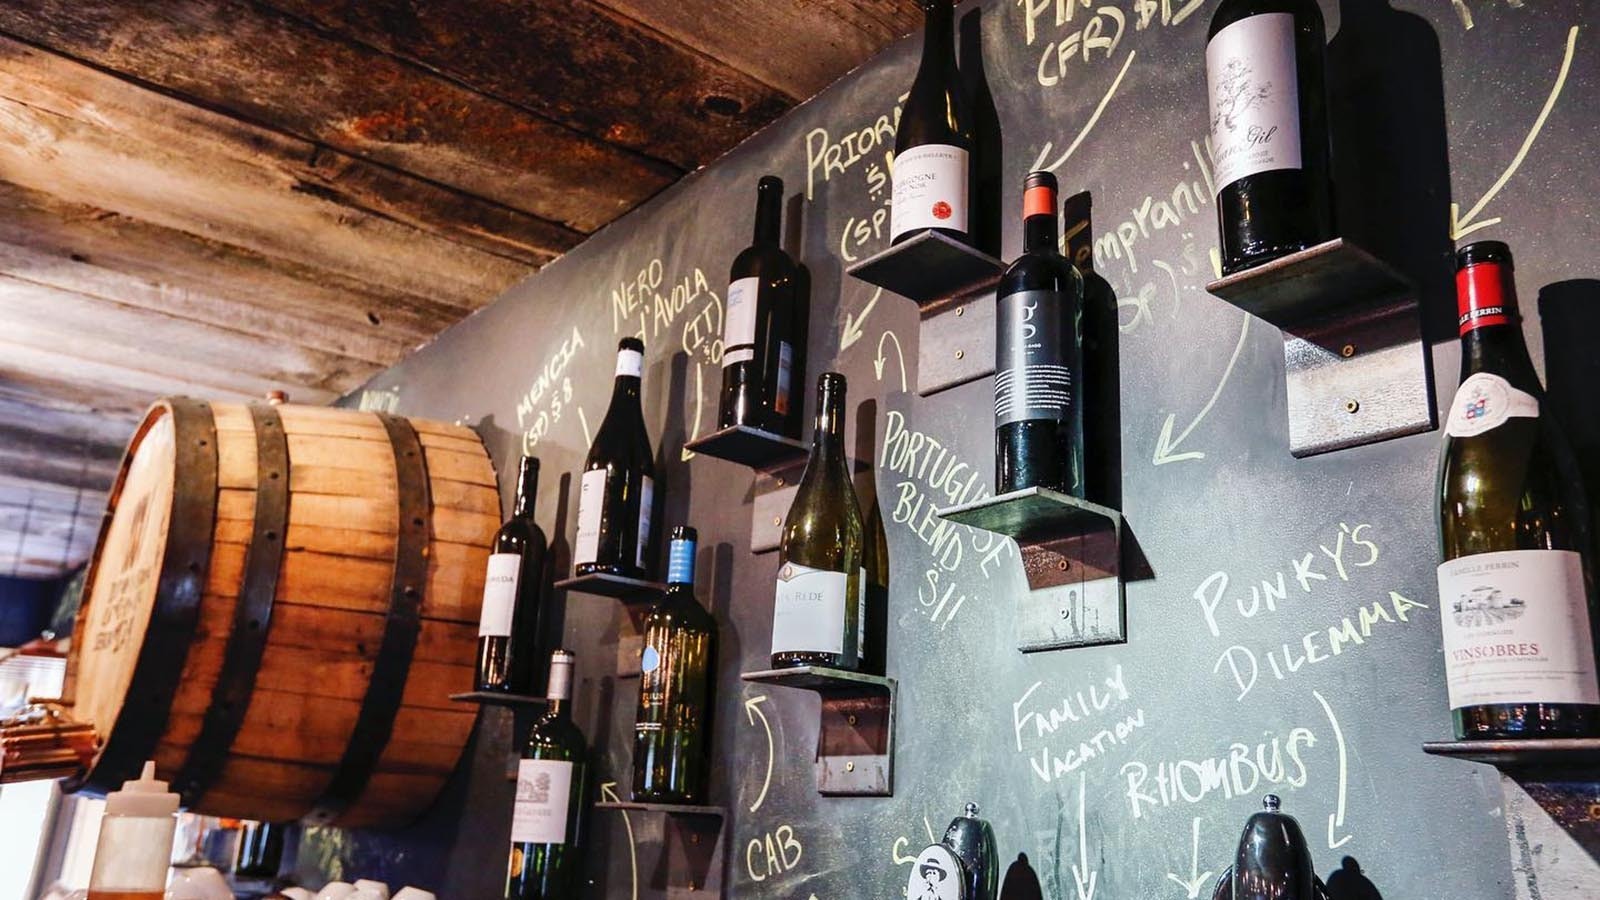 The Wine Wall at Bin22 features some of the staff's favorites.